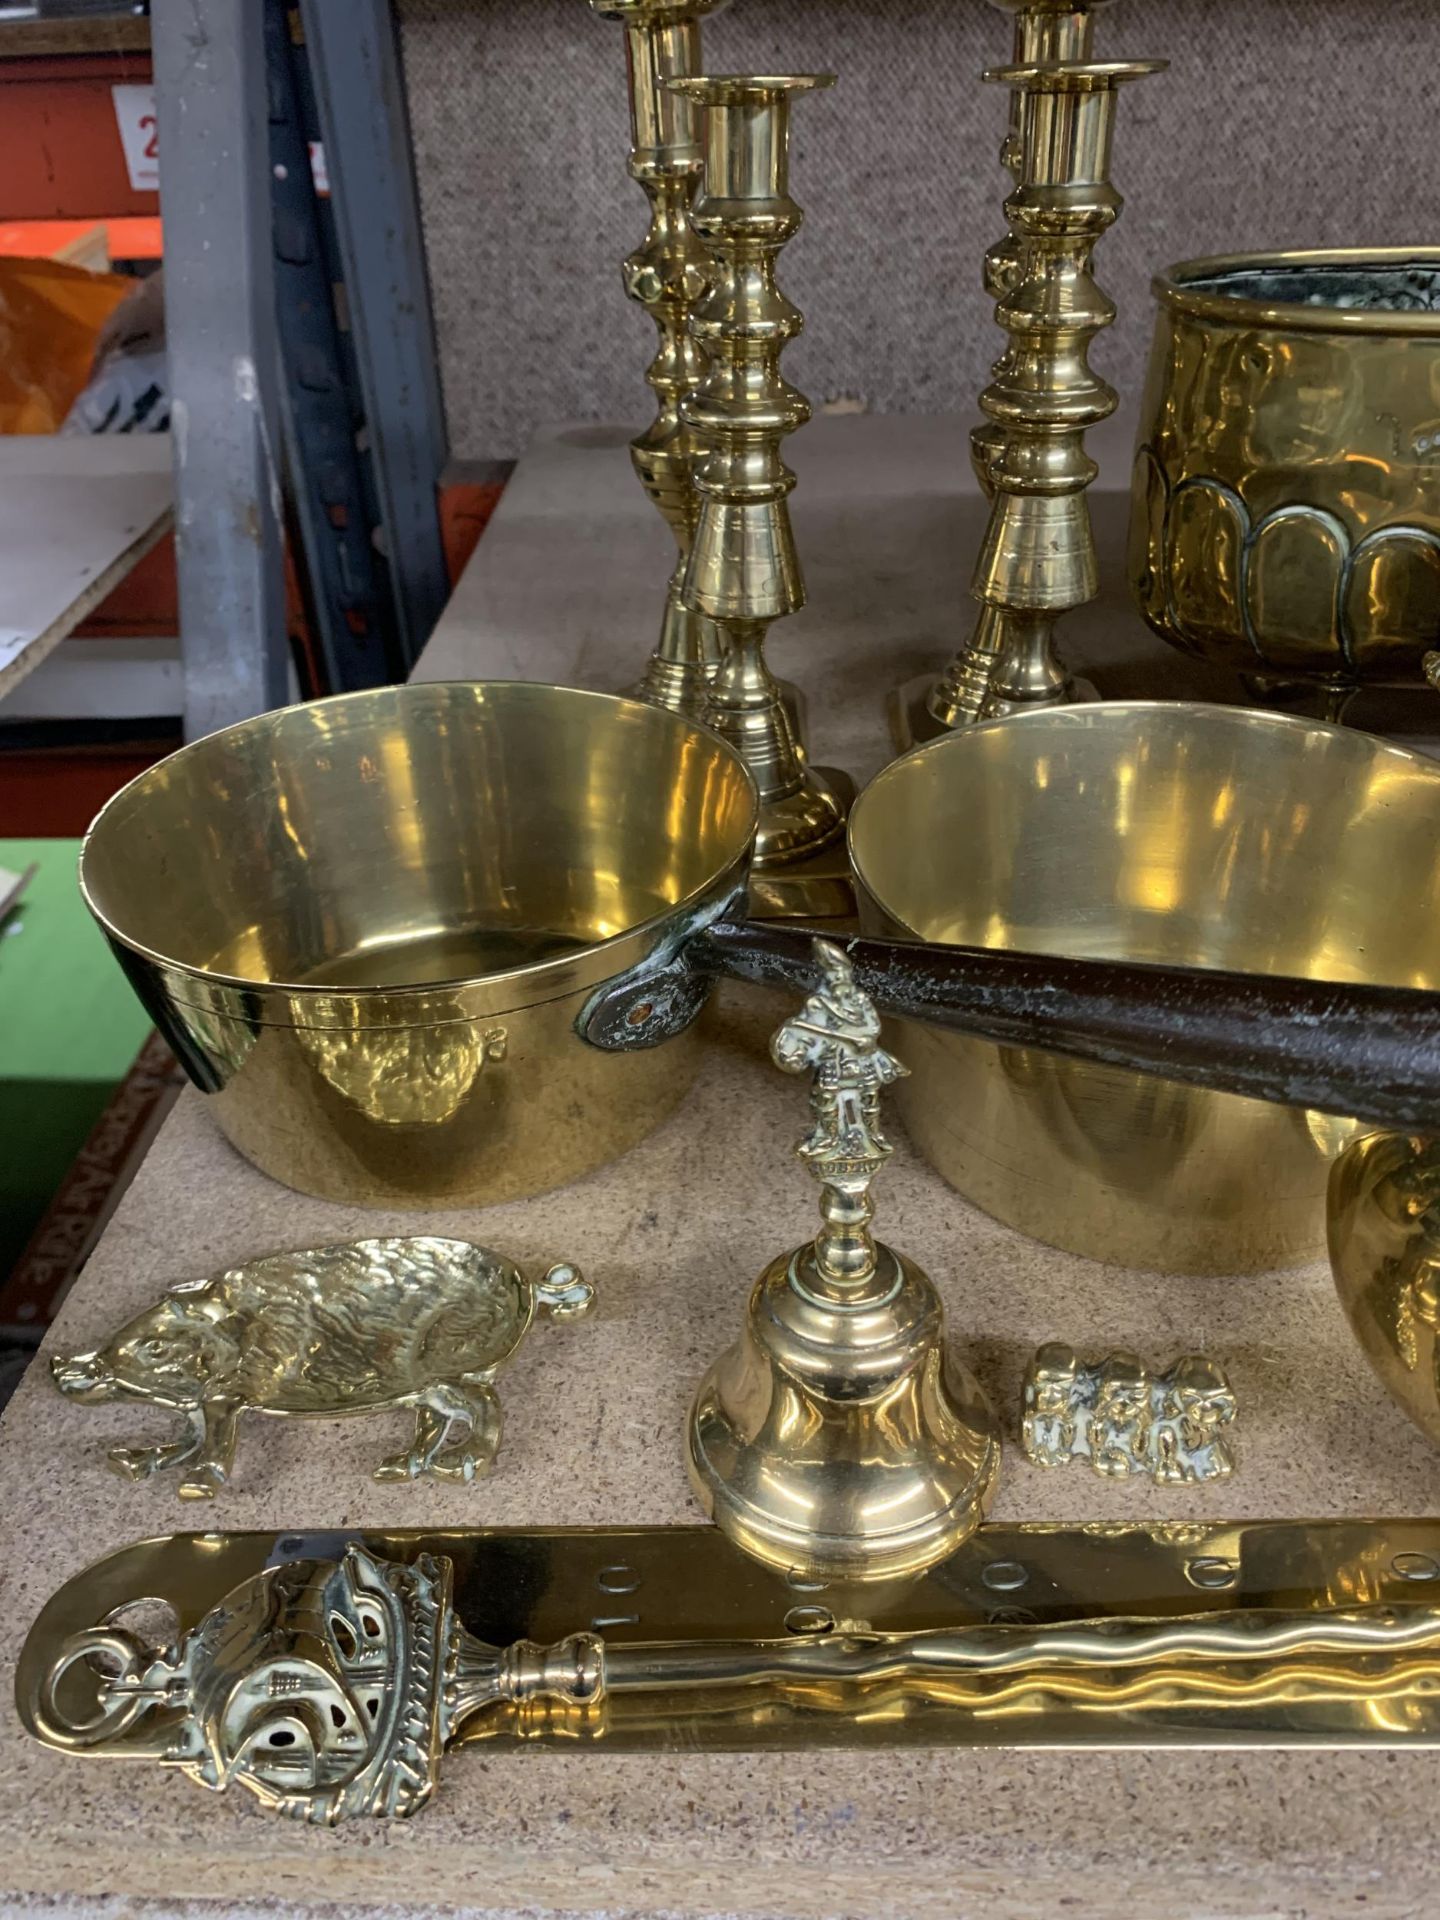 A LARGE QUANTITY OF BRASSWARE TO INCLUDE CANDLESTICKS, PLANTER, PANS, BELLS, ETC., - Image 2 of 5